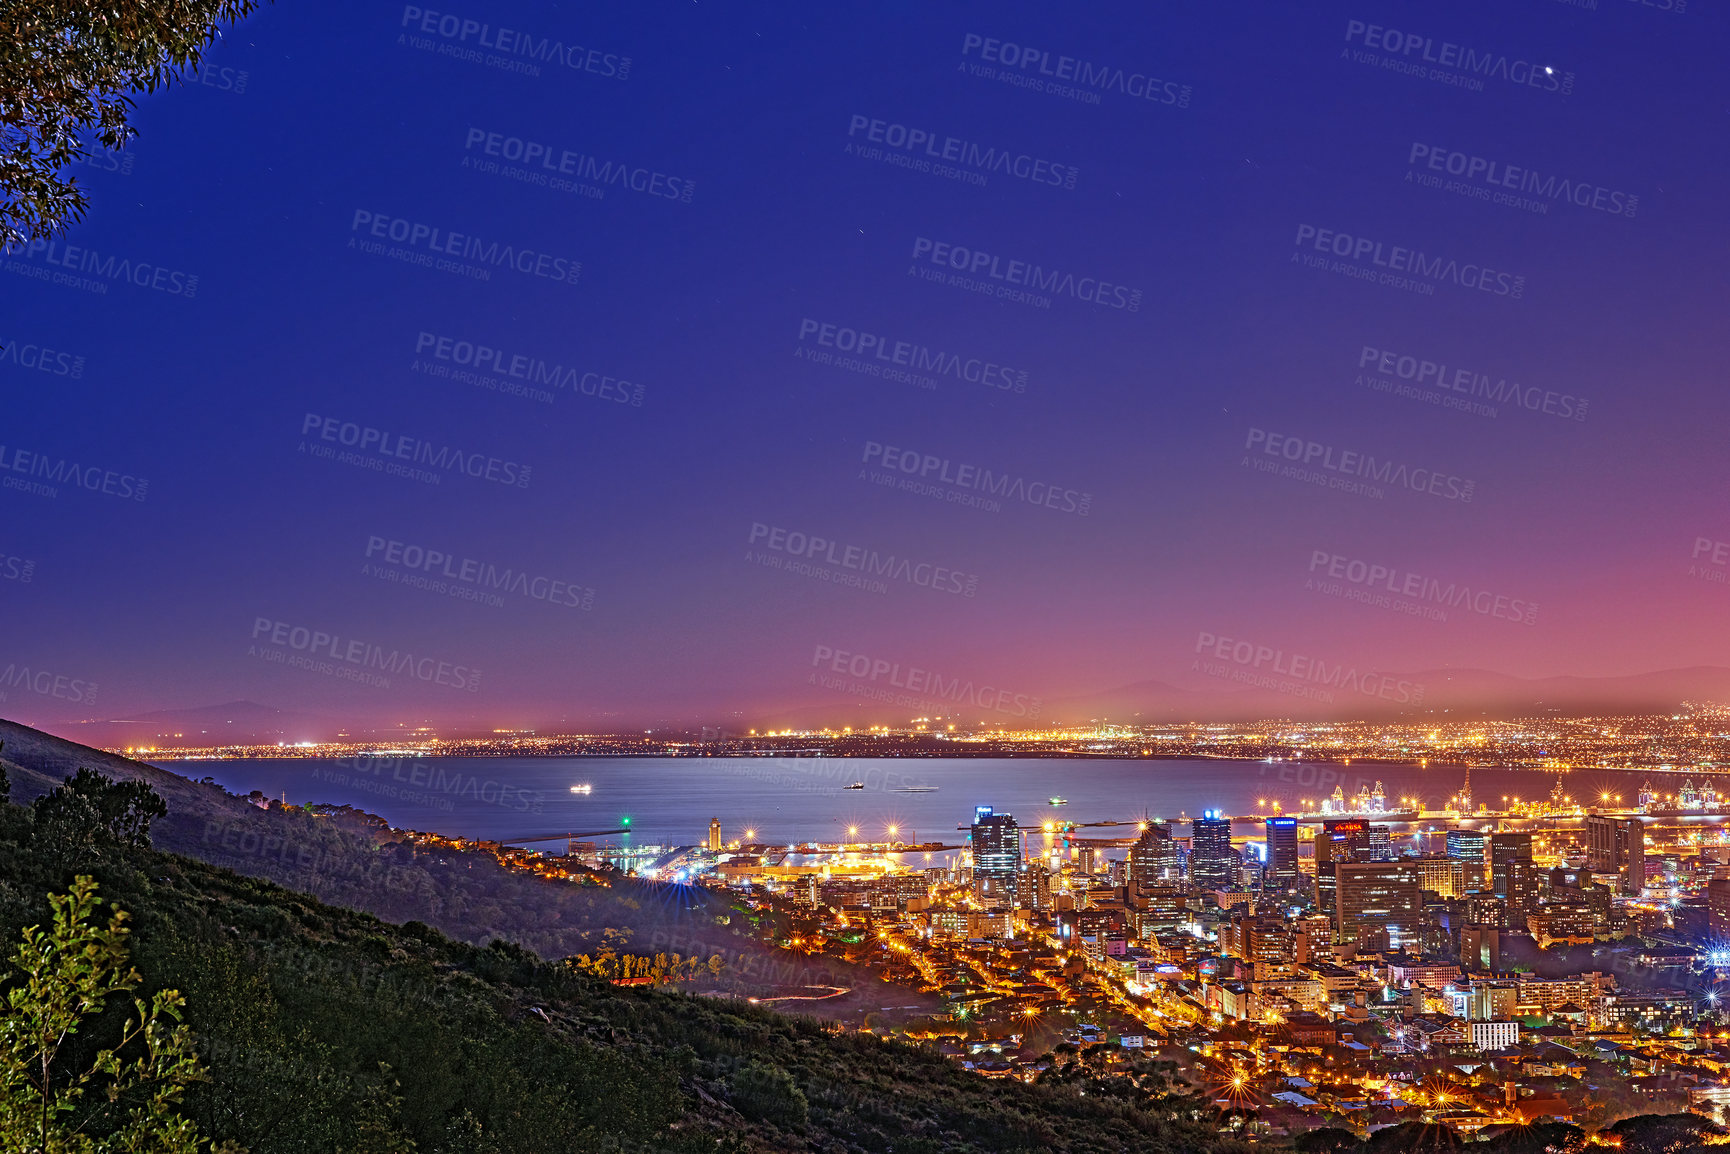 Buy stock photo Signal Hill in Cape Town South Africa with copyspace against dark night sky background and the view of a coastal city. Scenic panoramic landscape of lights illuminating an urban skyline along the sea